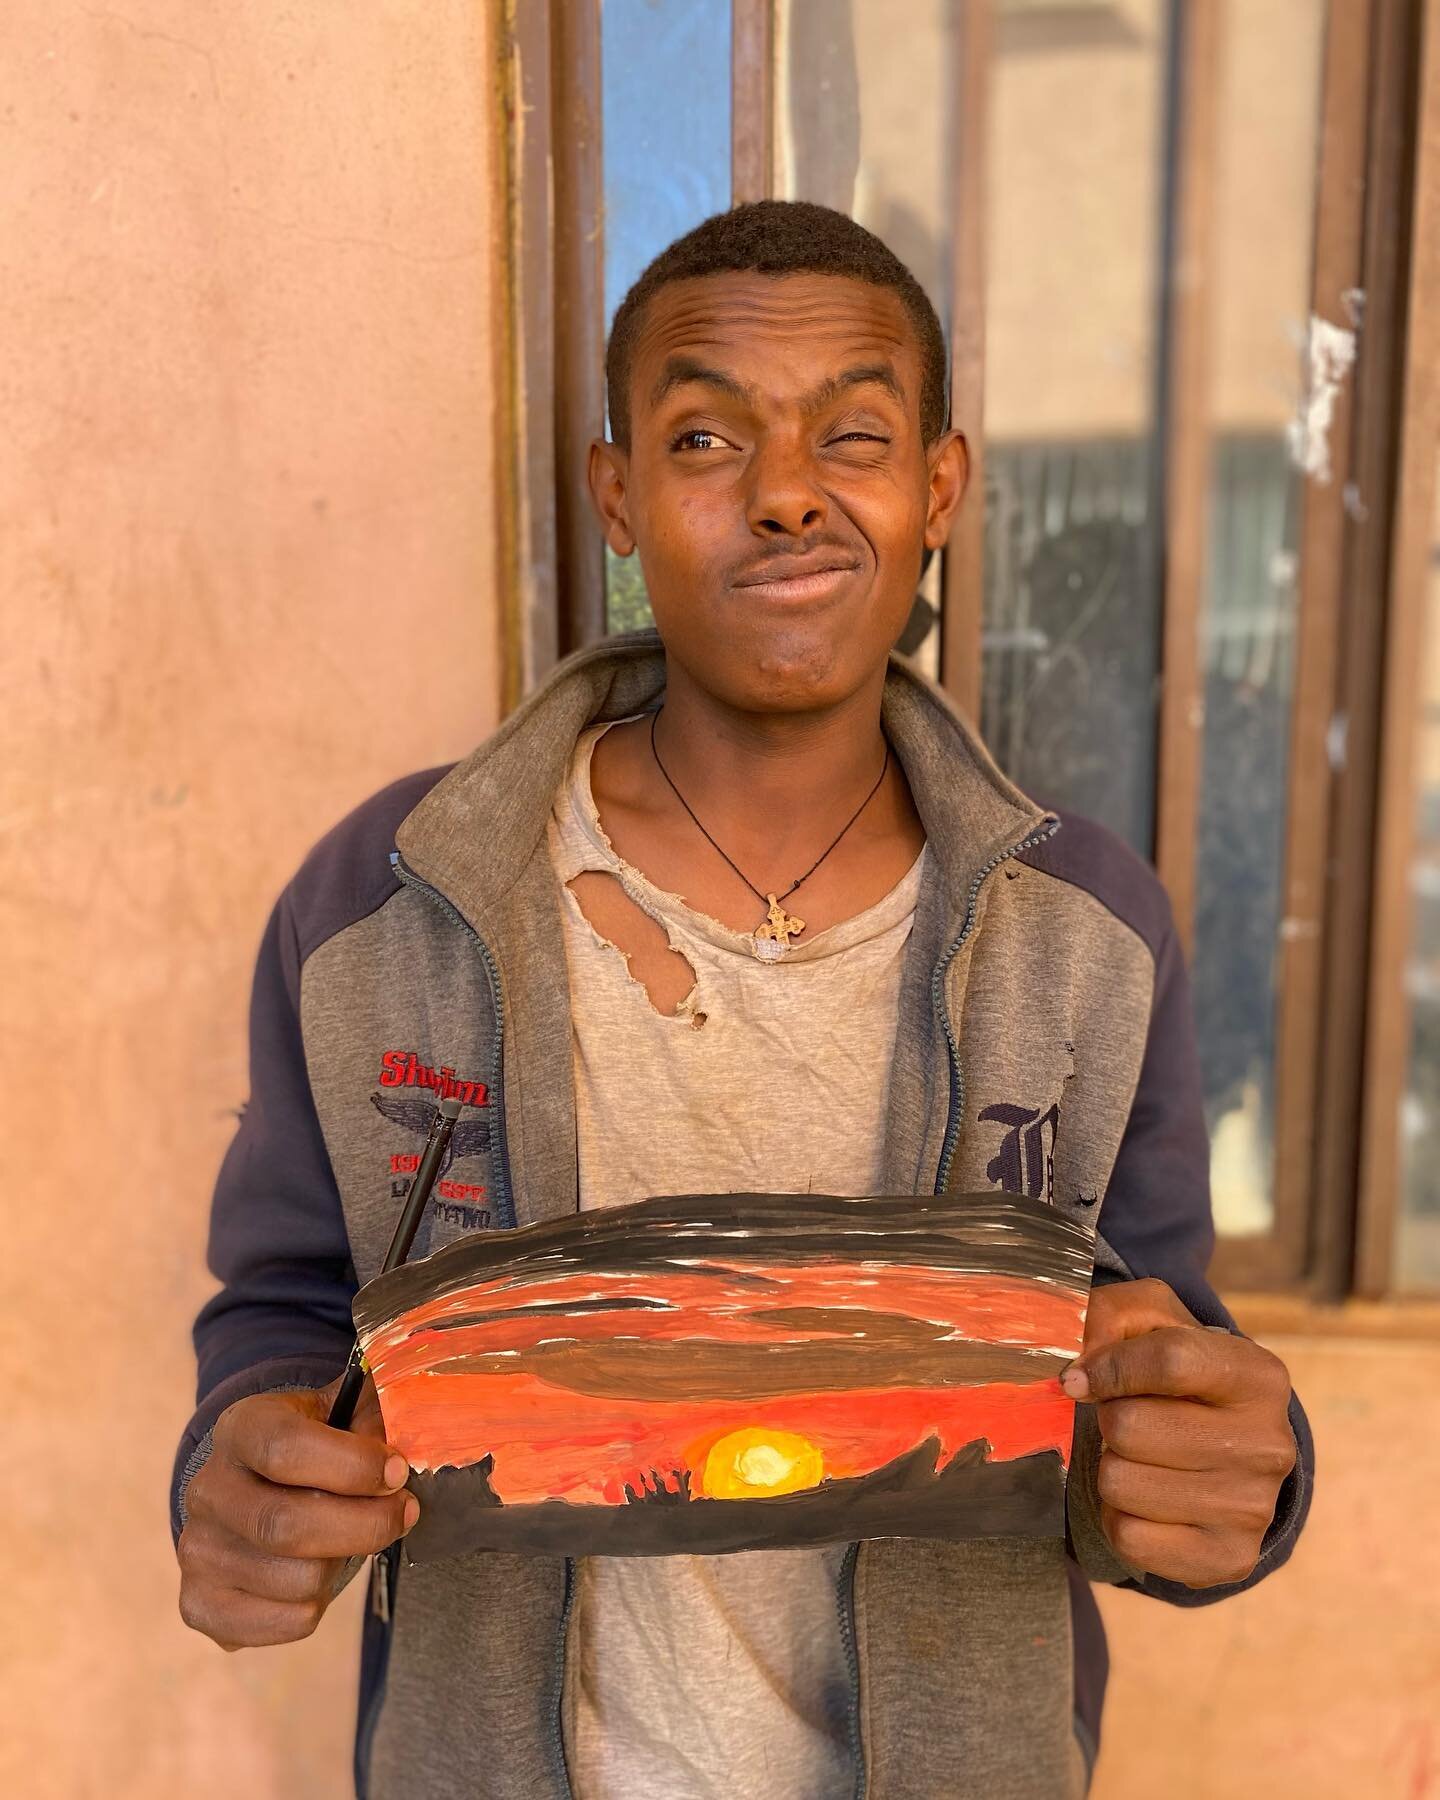 TBC Kids LOVE art and we love encouraging them to express themselves creatively. Our goal is to bring 200lbs of art supplies to Ethiopia this June! Donate supplies today by clicking the link in our bio! 🎨